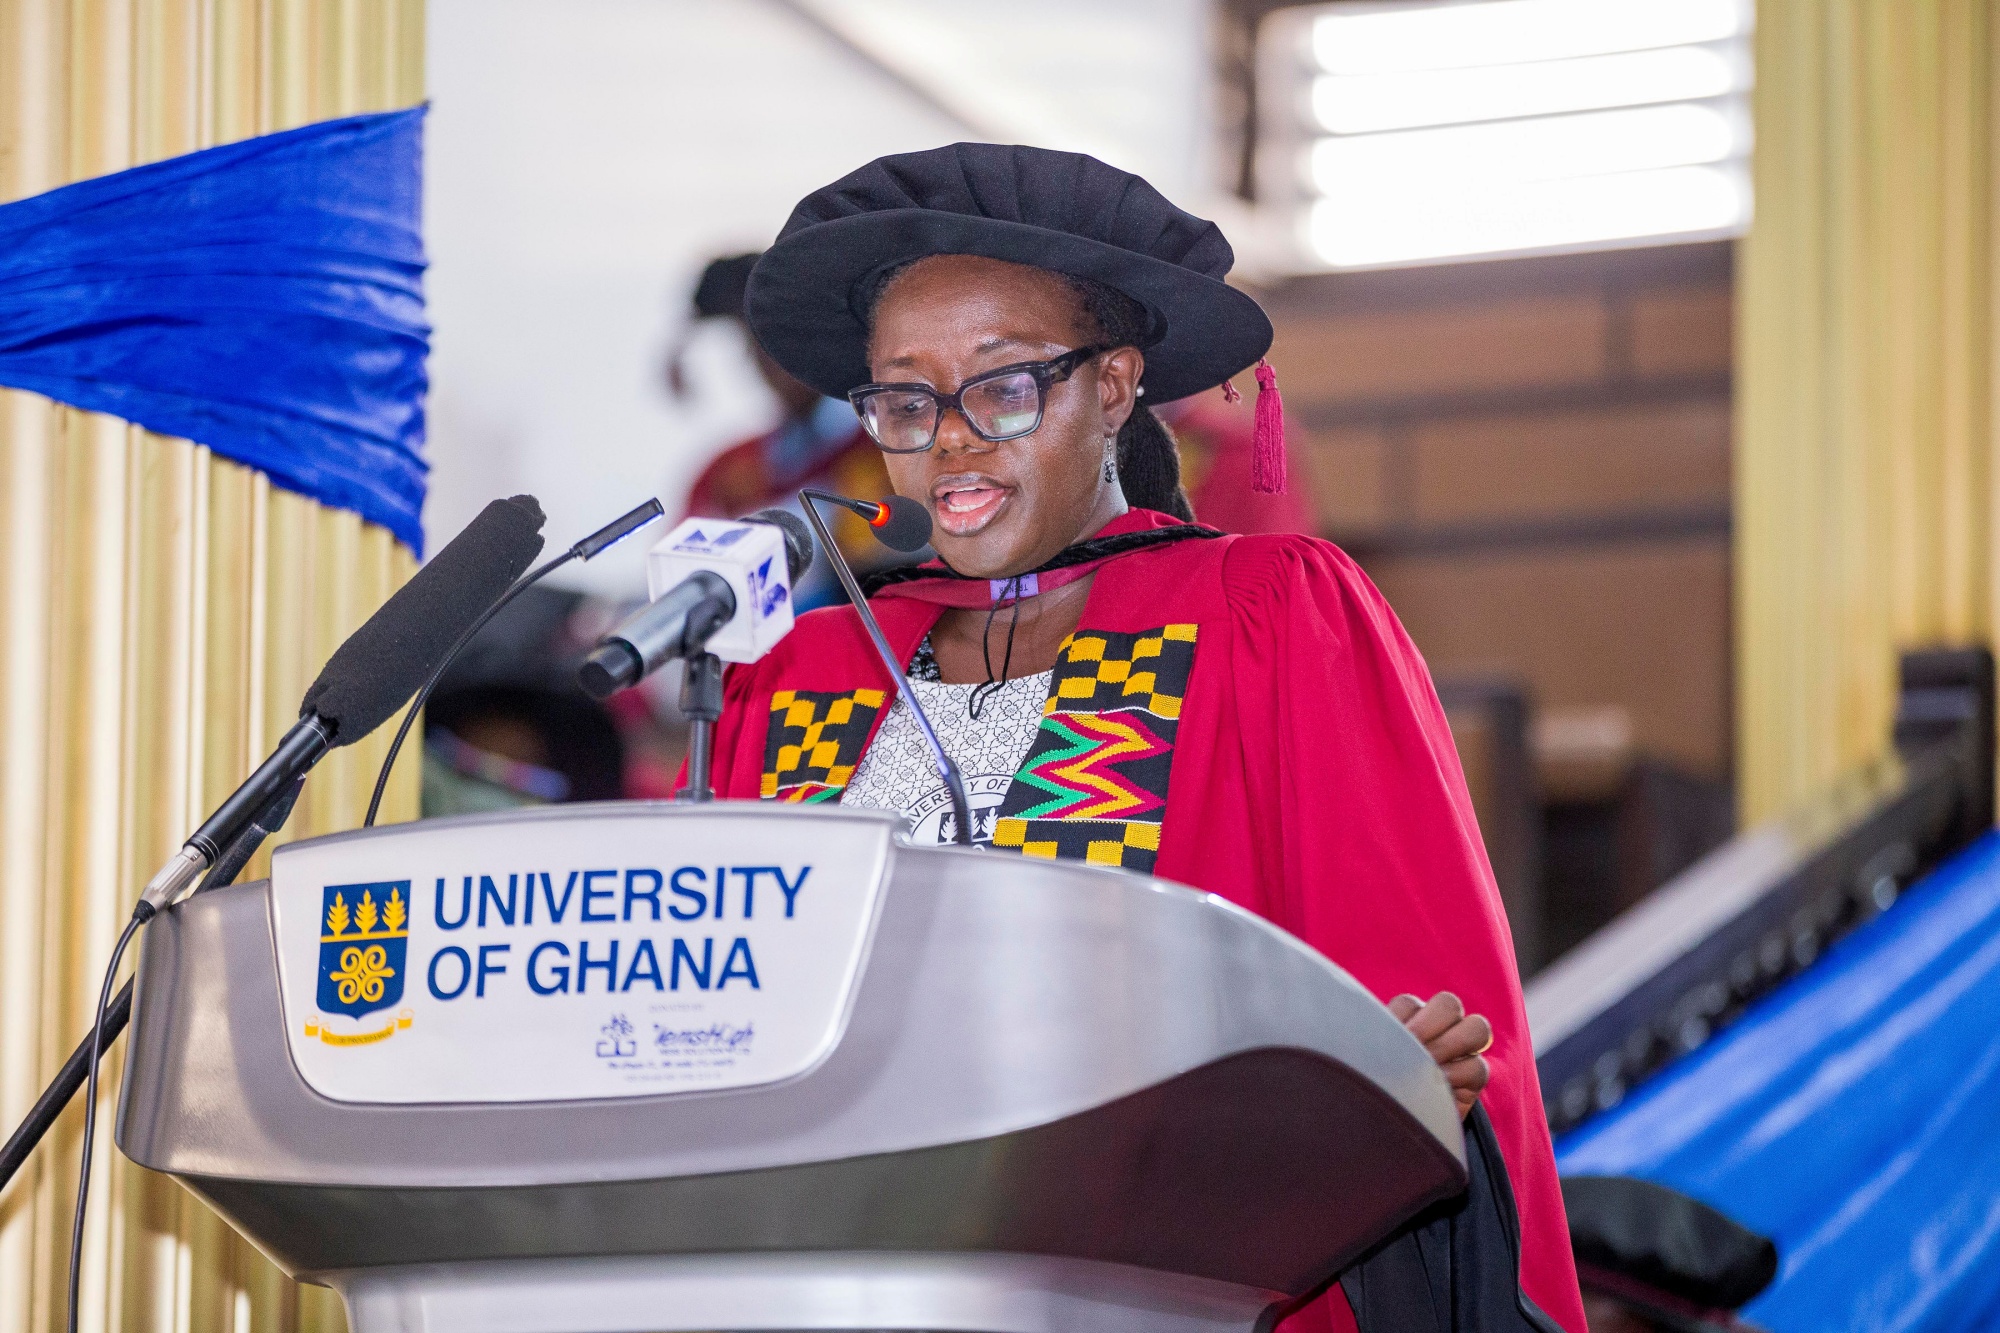 the Vice-Chancellor and Chairperson of the occasion, Prof. Nana Aba Appiah Amfo